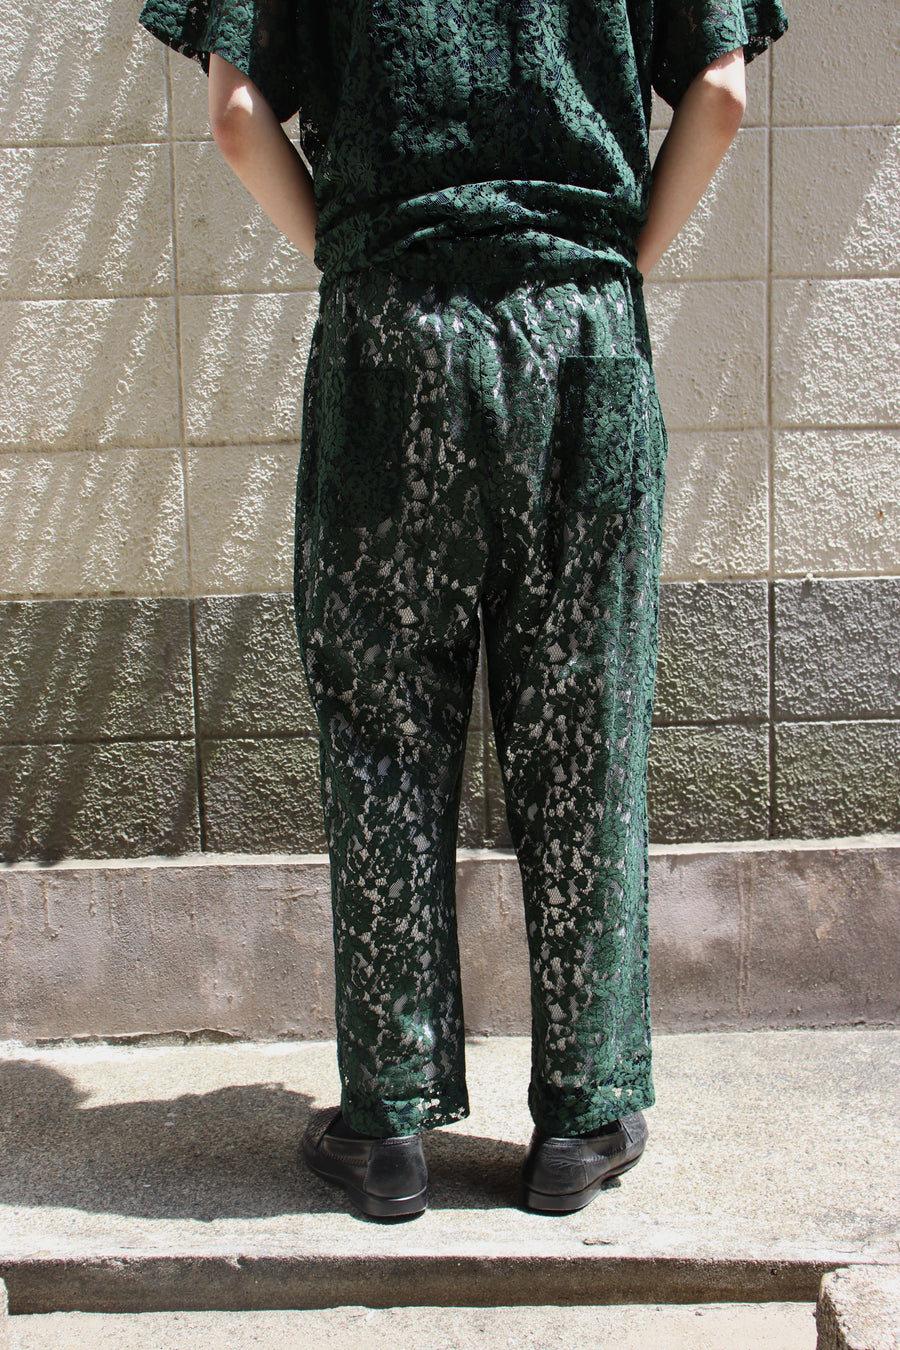 Urig  LACE EASY FL PANTS(GREEN)